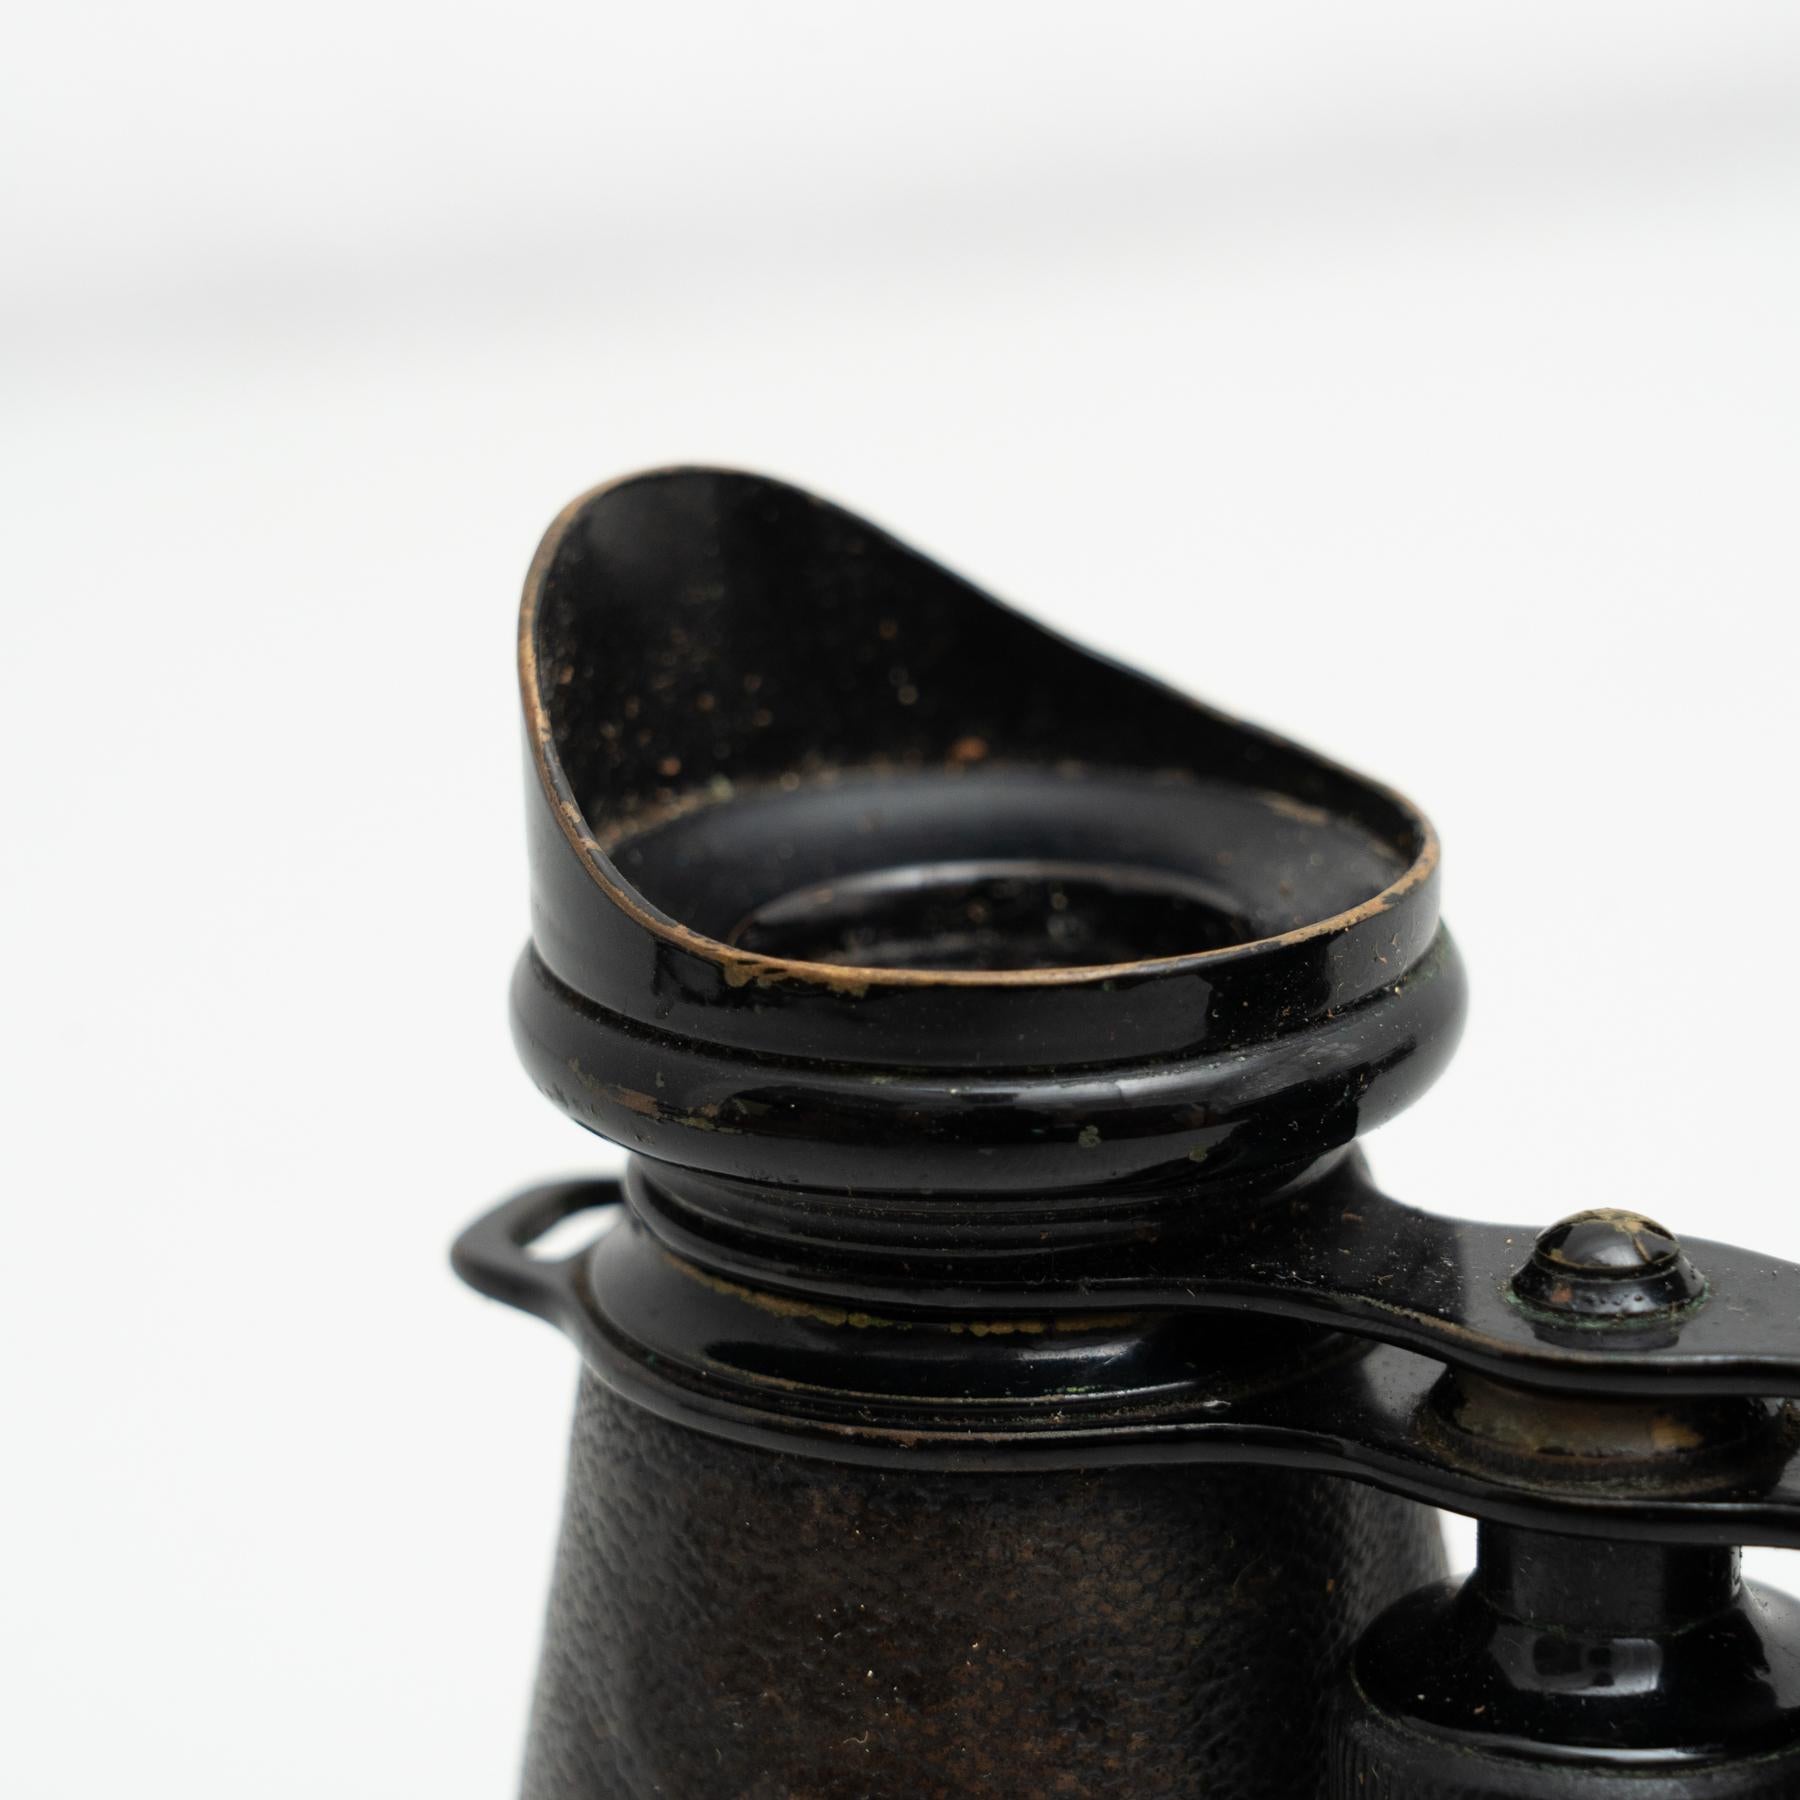 Antique Vintage Binoculars on a Leather Case, circa 1950 For Sale 3